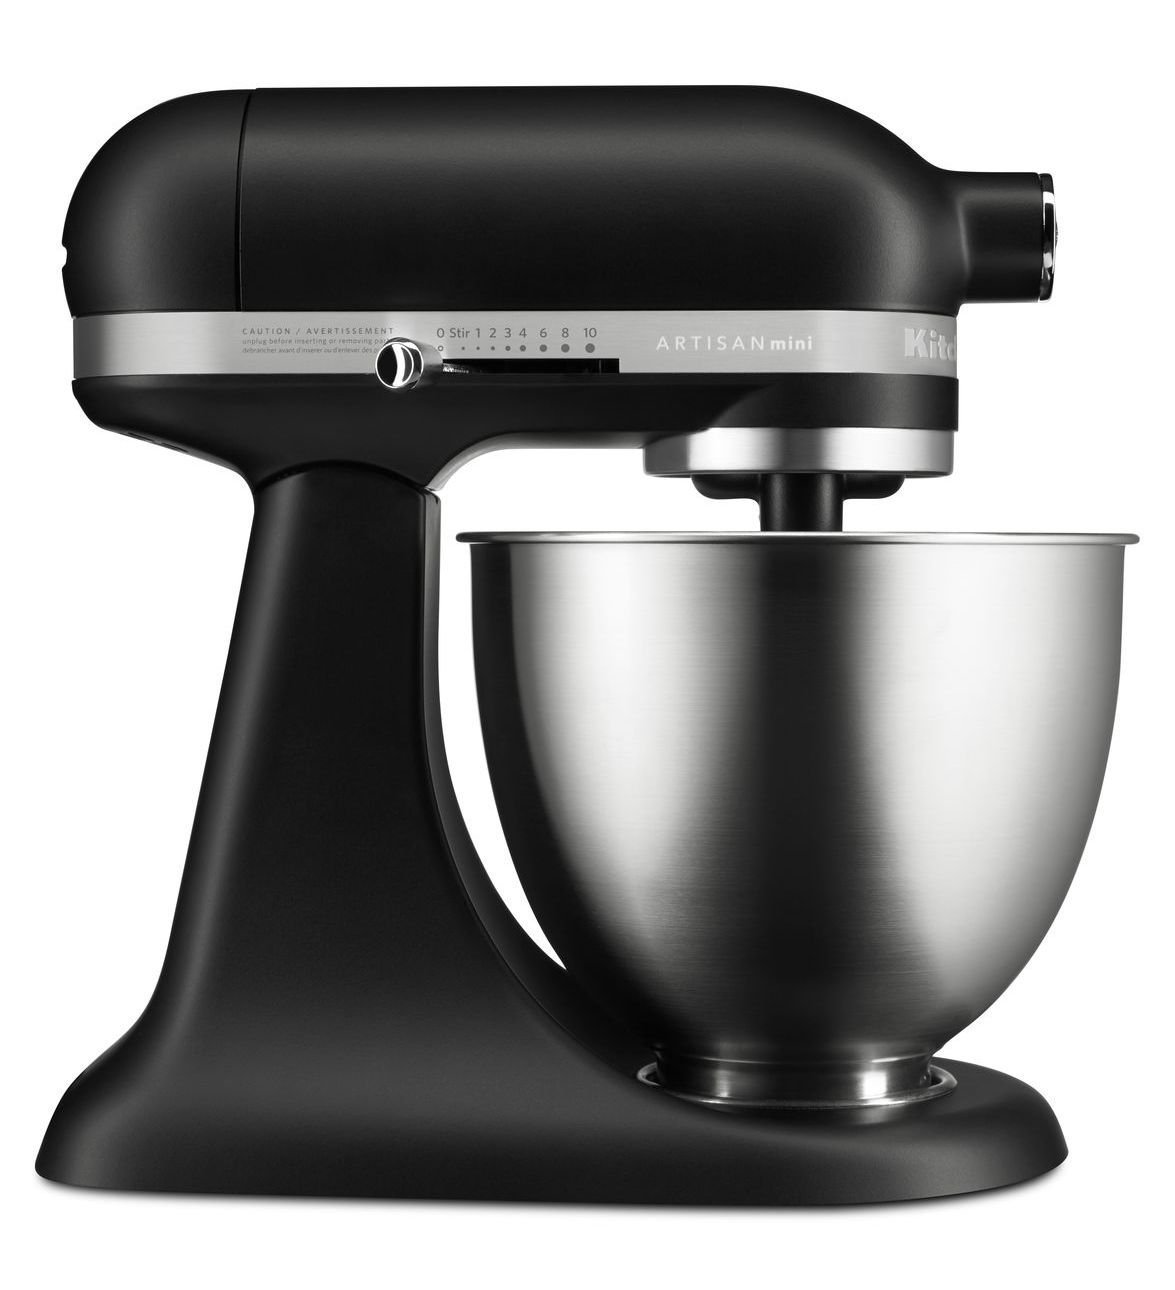 Today Only: KitchenAid Artisan Mini Series 3.5 Qt Tilt-Head Stand Mixer For $127.96-$159.95 Shipped From Amazon